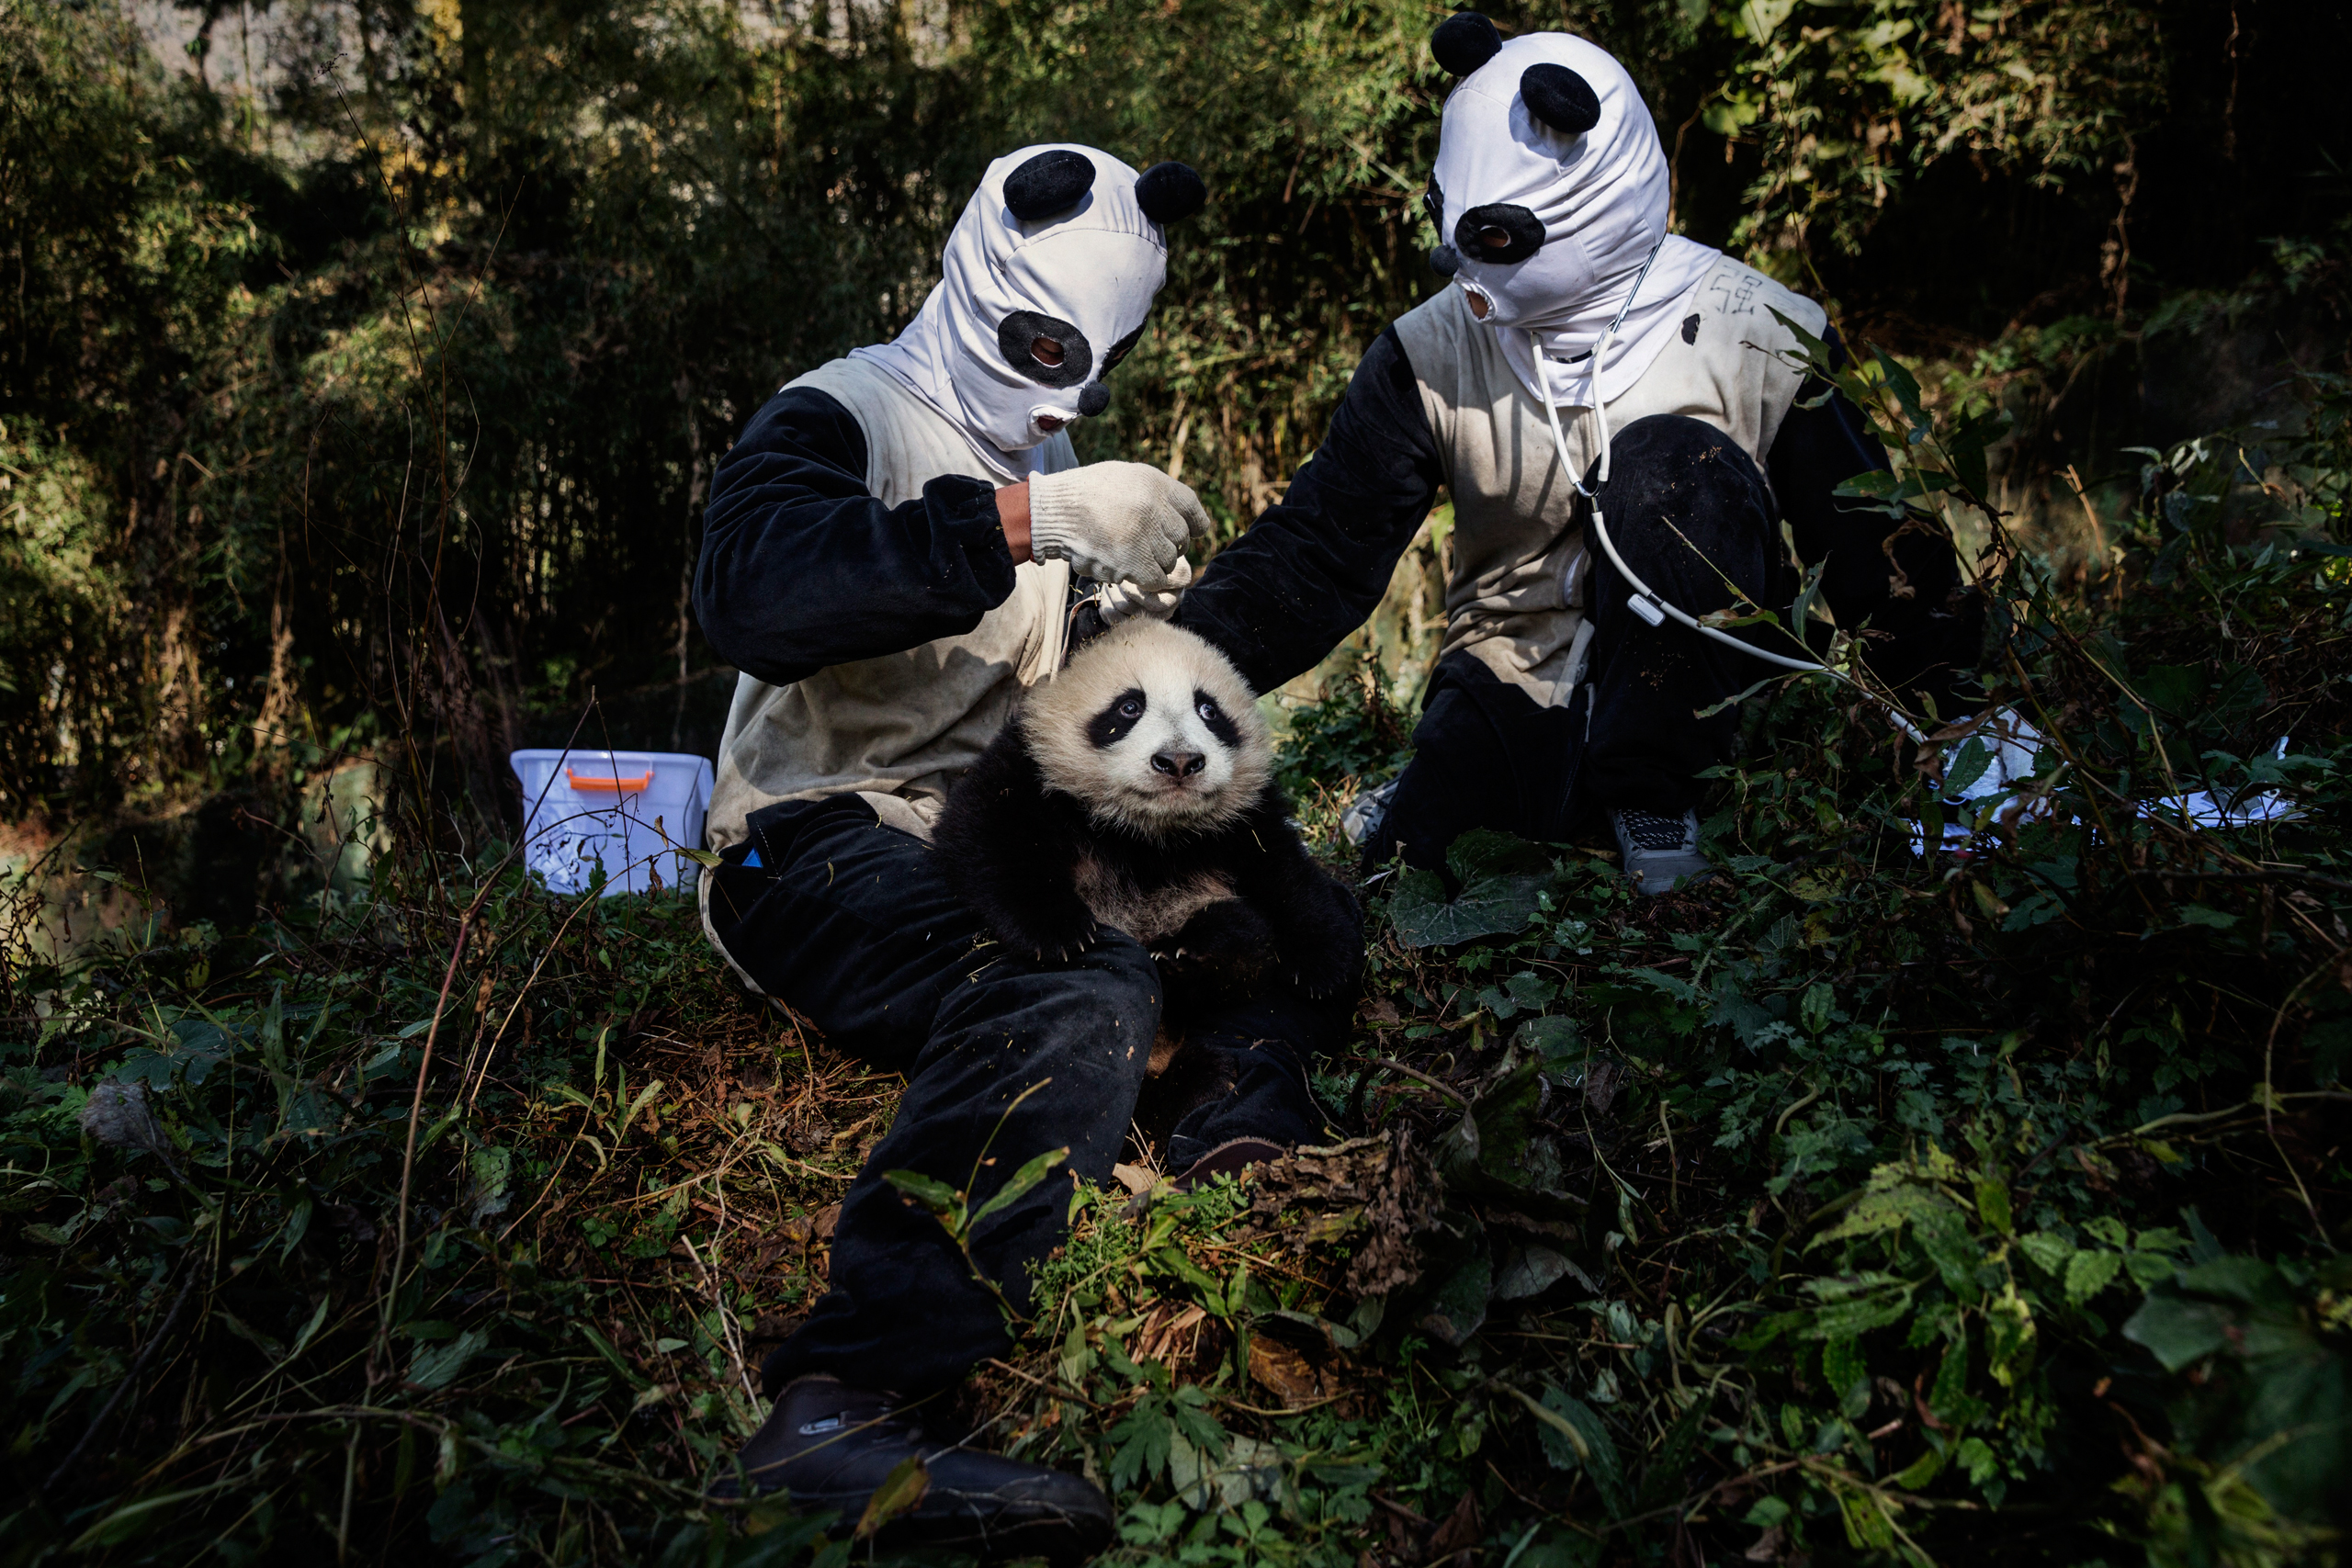 Dressed in panda costumes, researchers in Wolong, the home of China’s panda-conservation efforts, check a 4-month-old female cub (Photograph by Adam Dean for TIME)